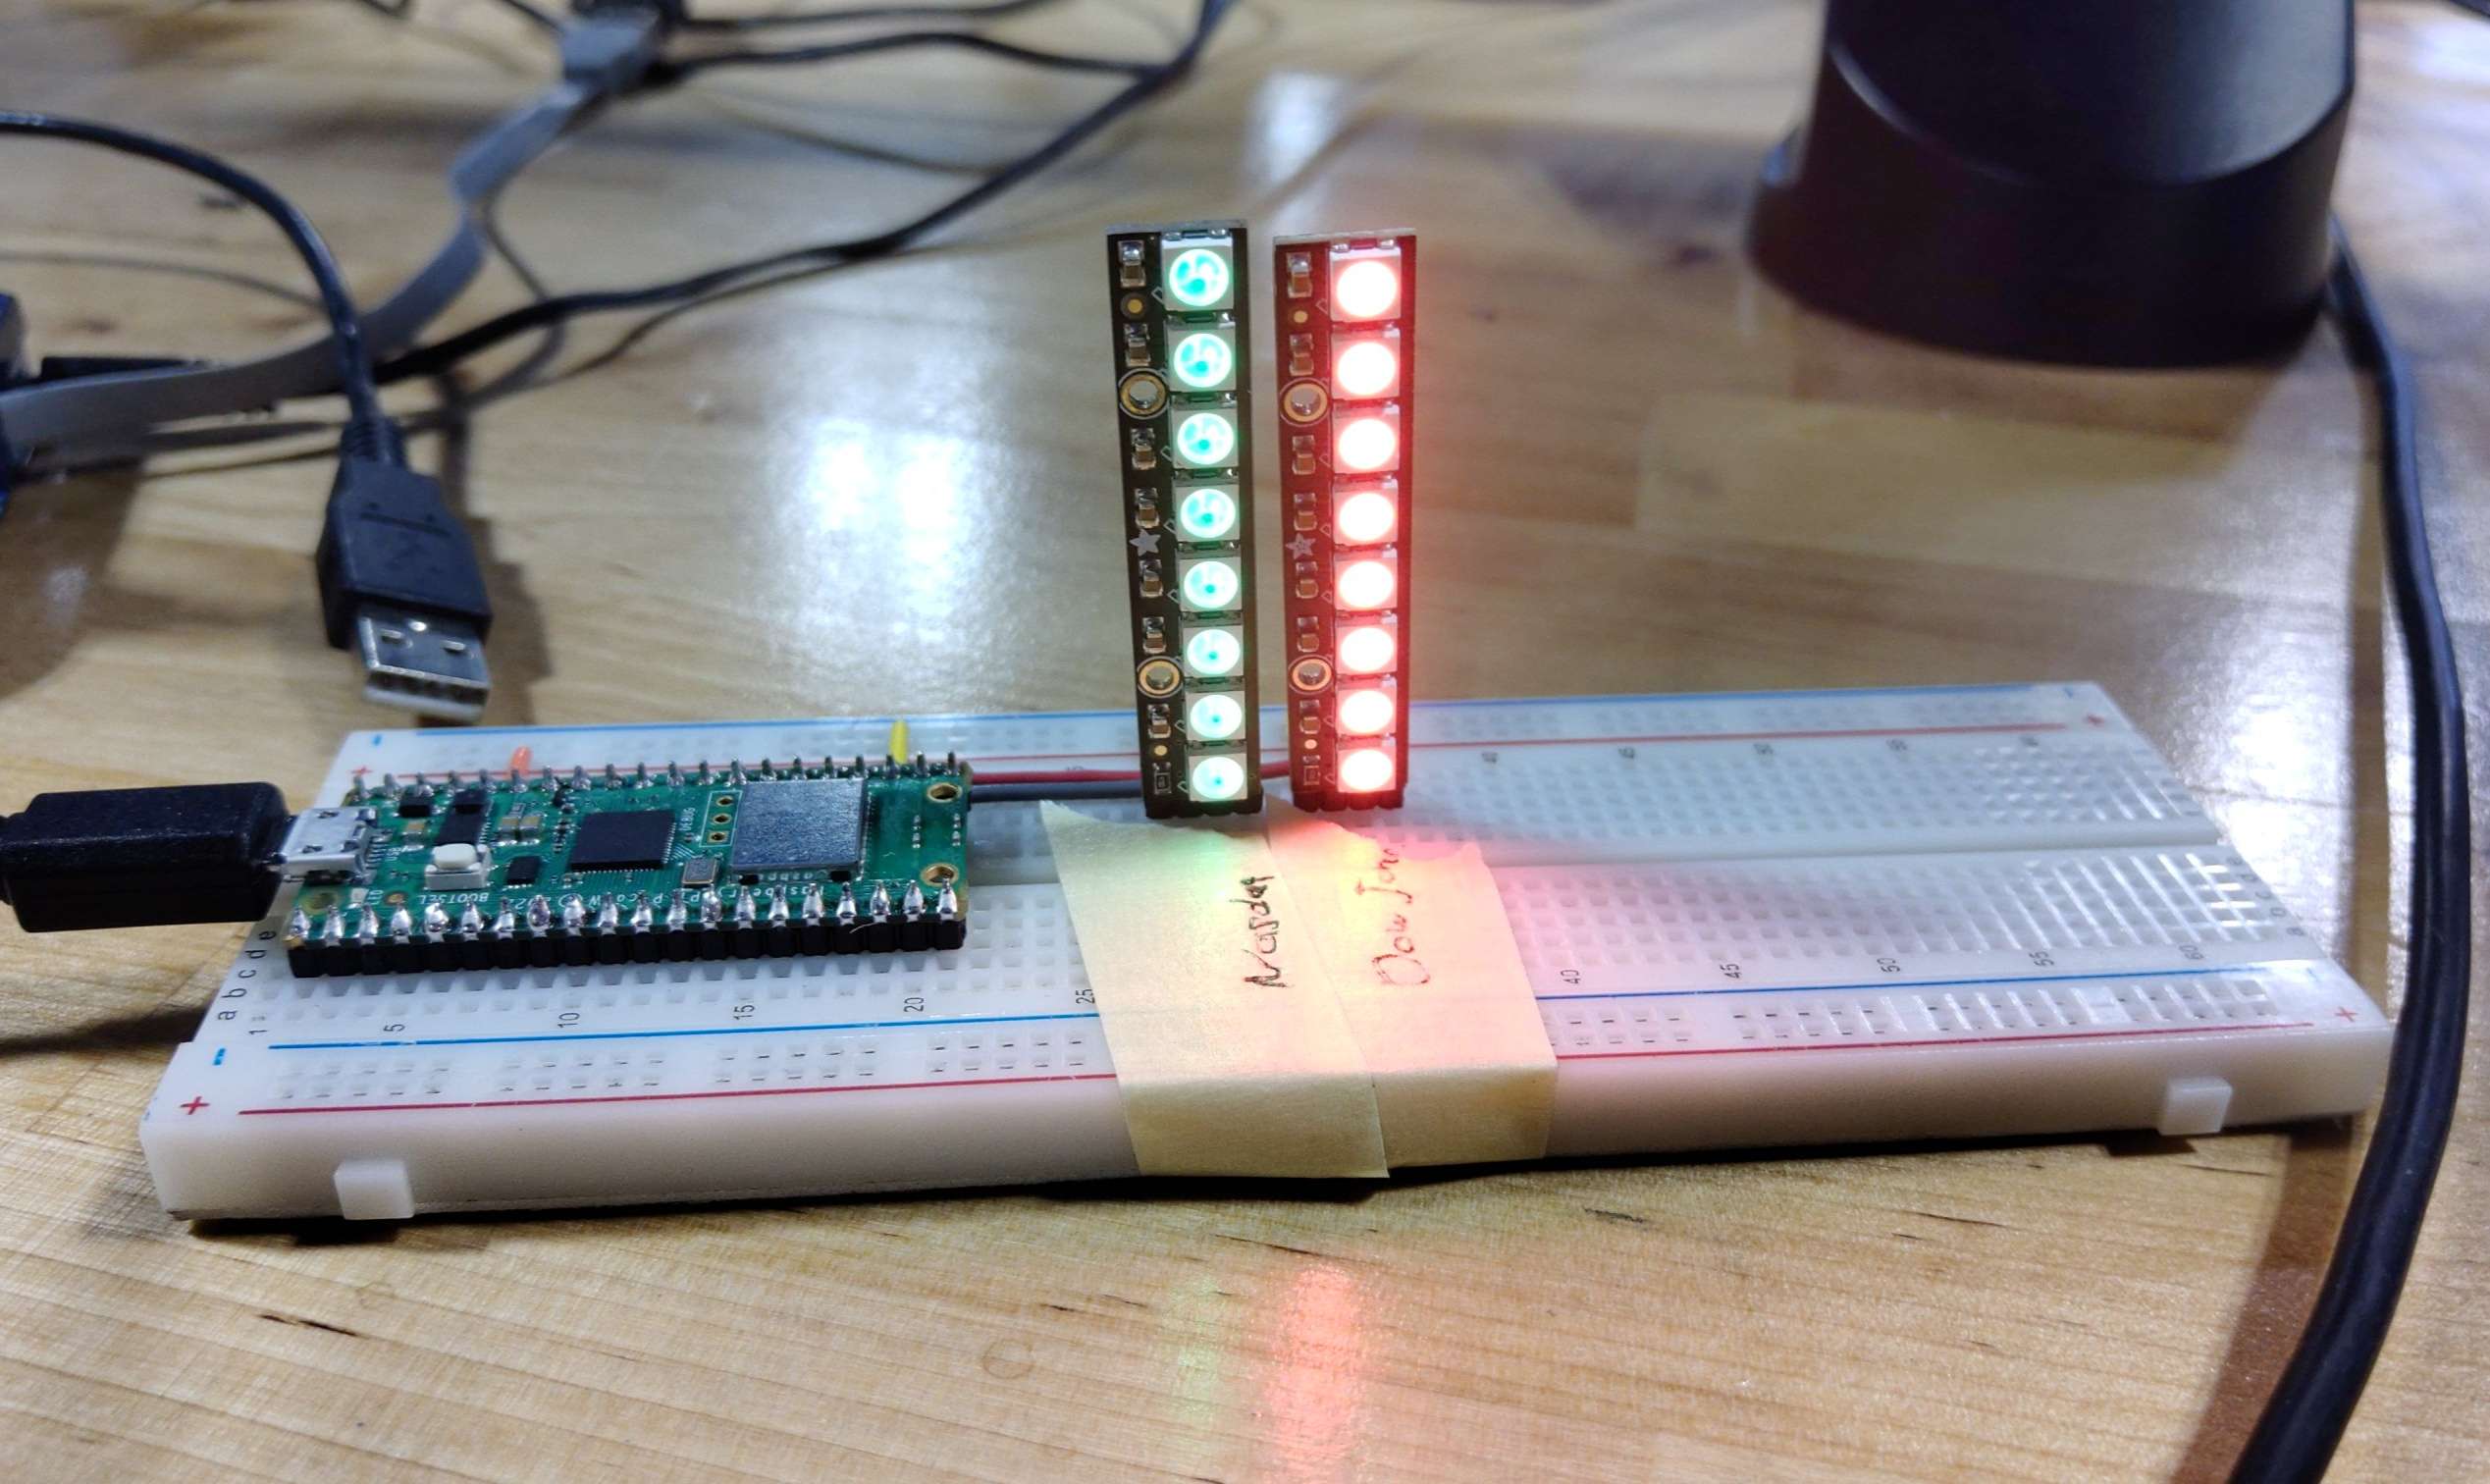 Code running with two NeoPixel Sticks showing data from NASDAQ and Dow Jones